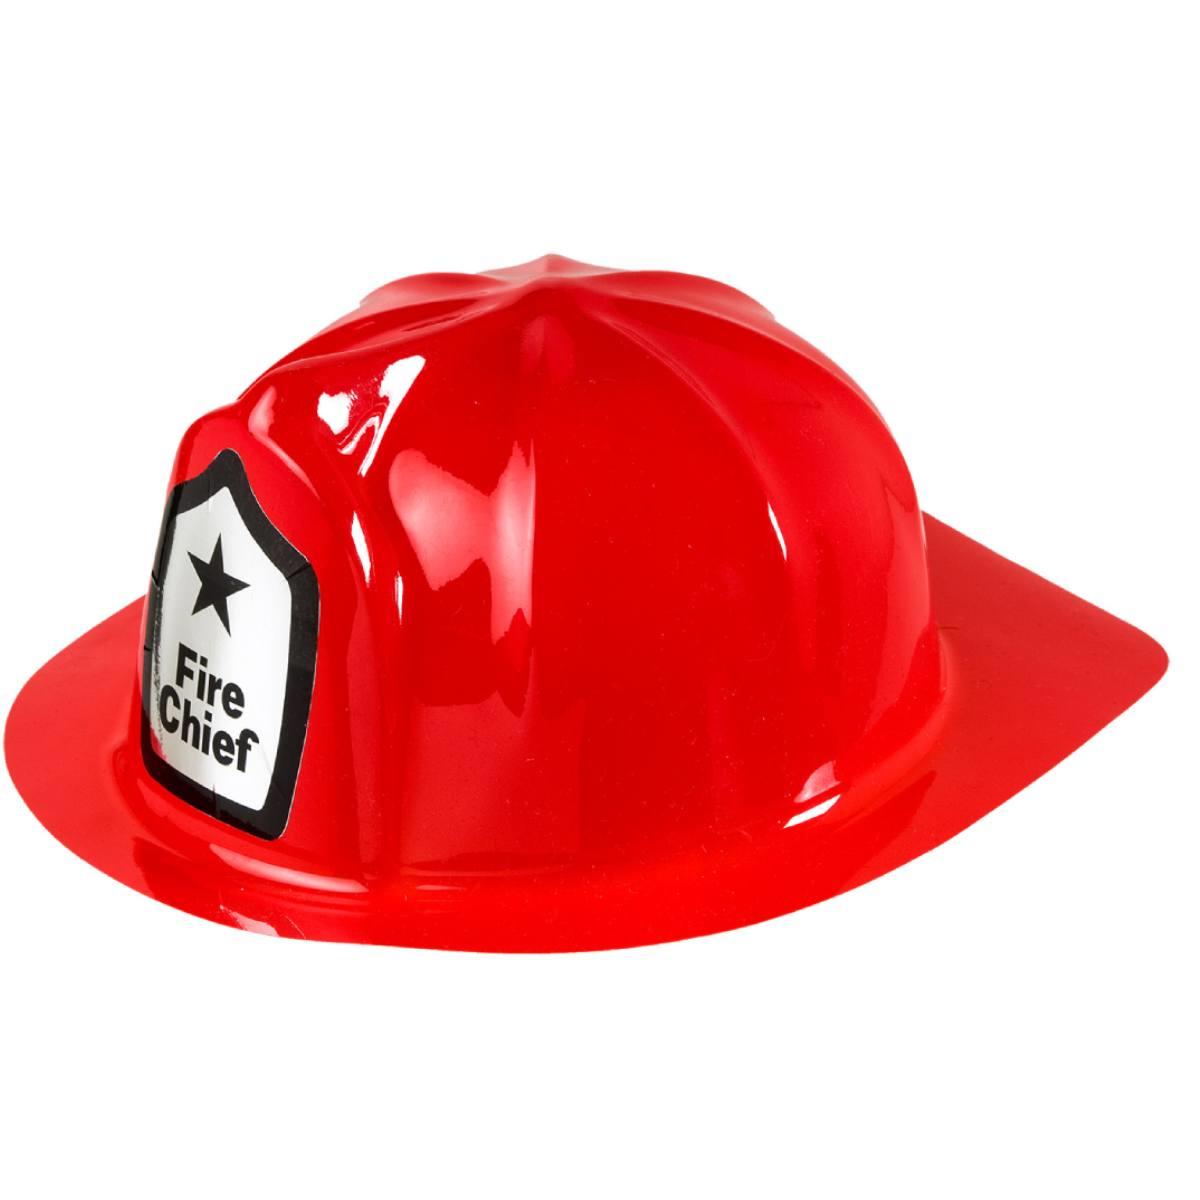 Adult Firefighters Helmet by Widmann 2862A available at Karnival Costumes